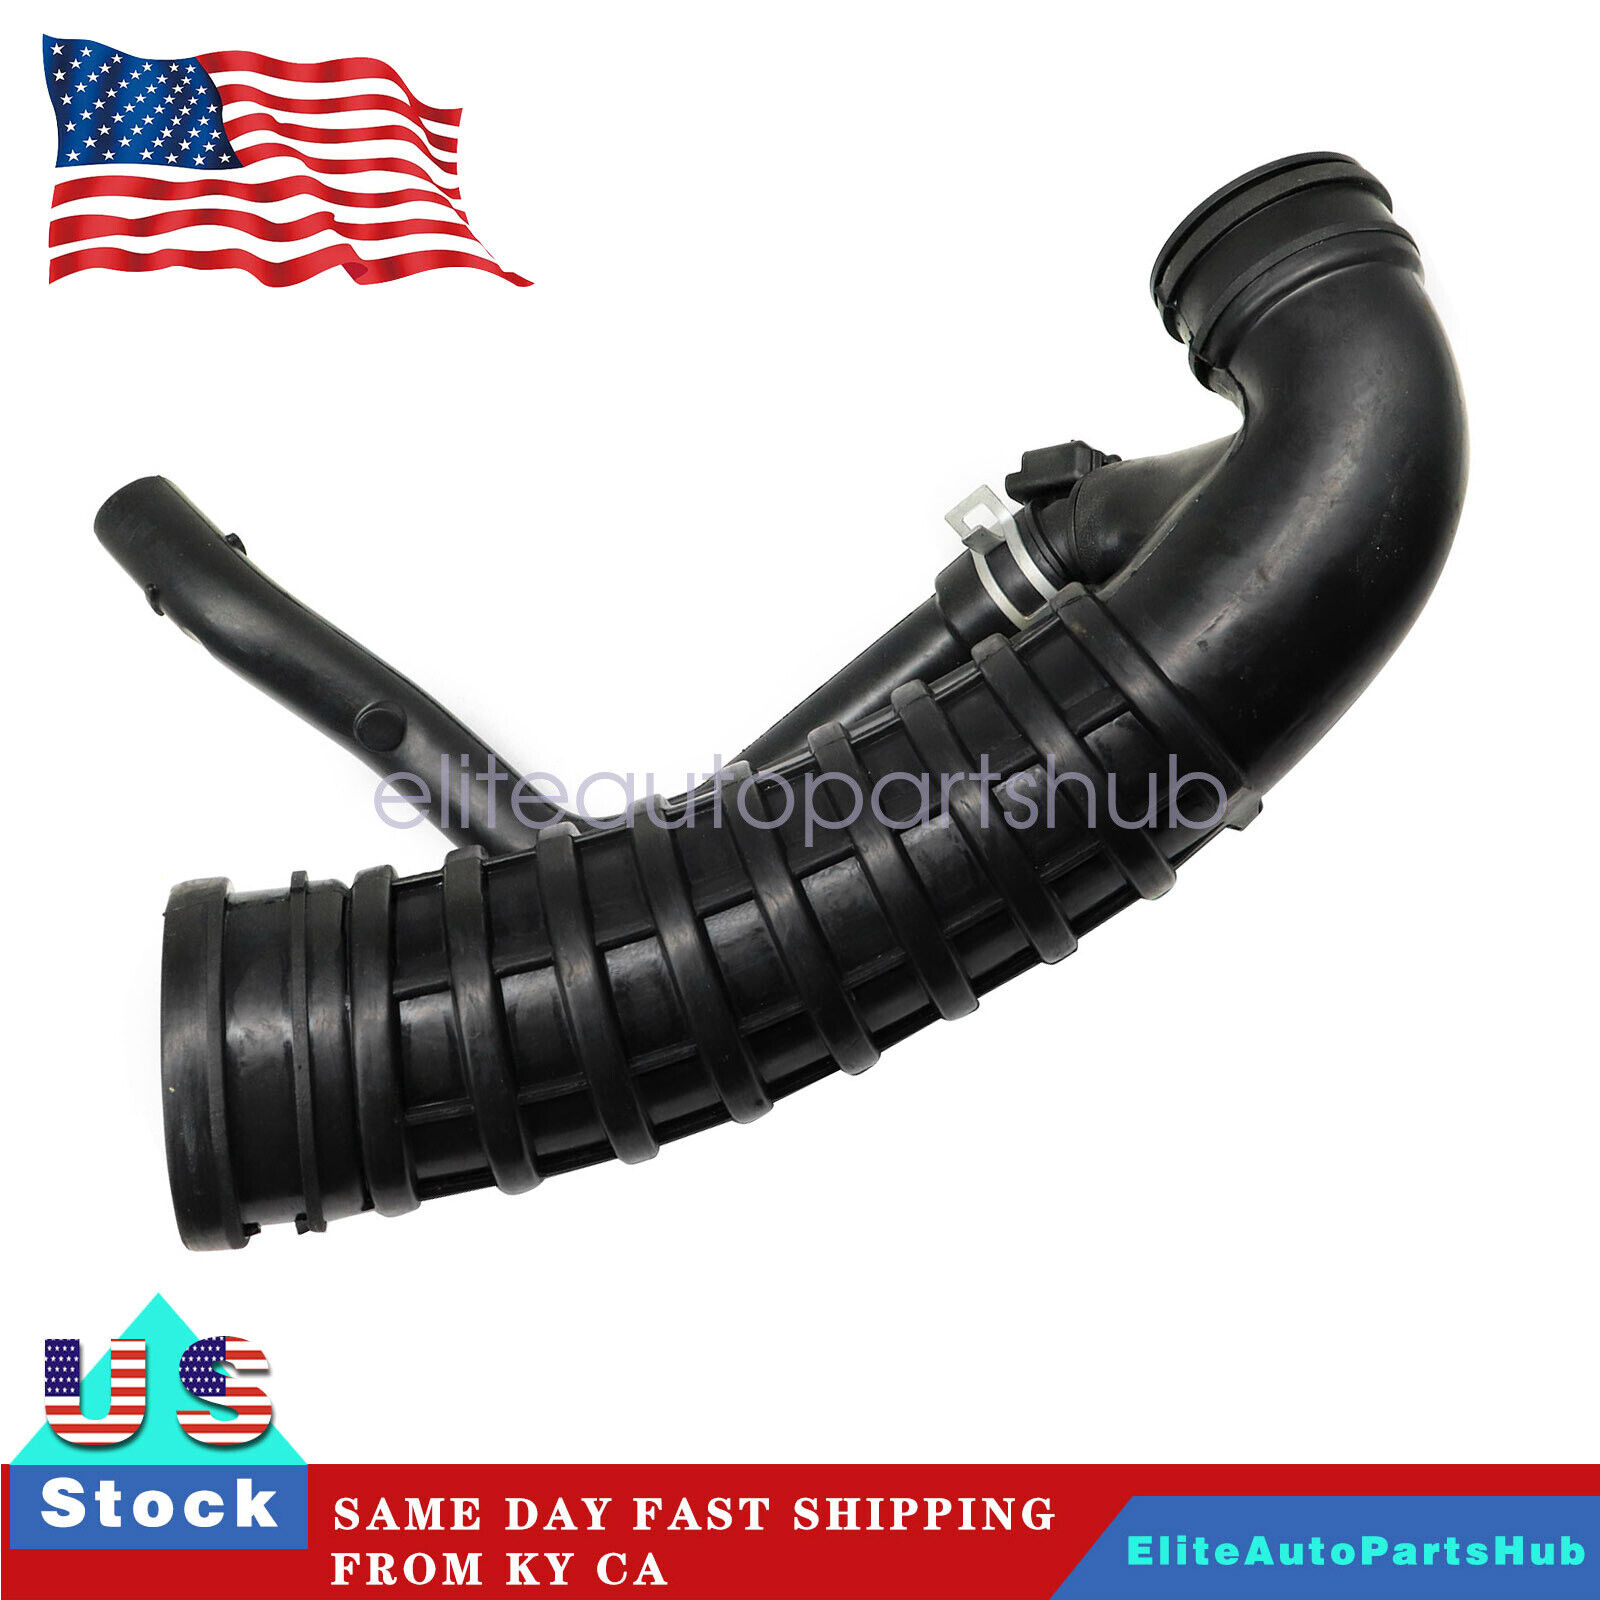 New 13717555784 Air Intake Hoses for 2007-2010 Mini Cooper S R55 R56 R57 USA